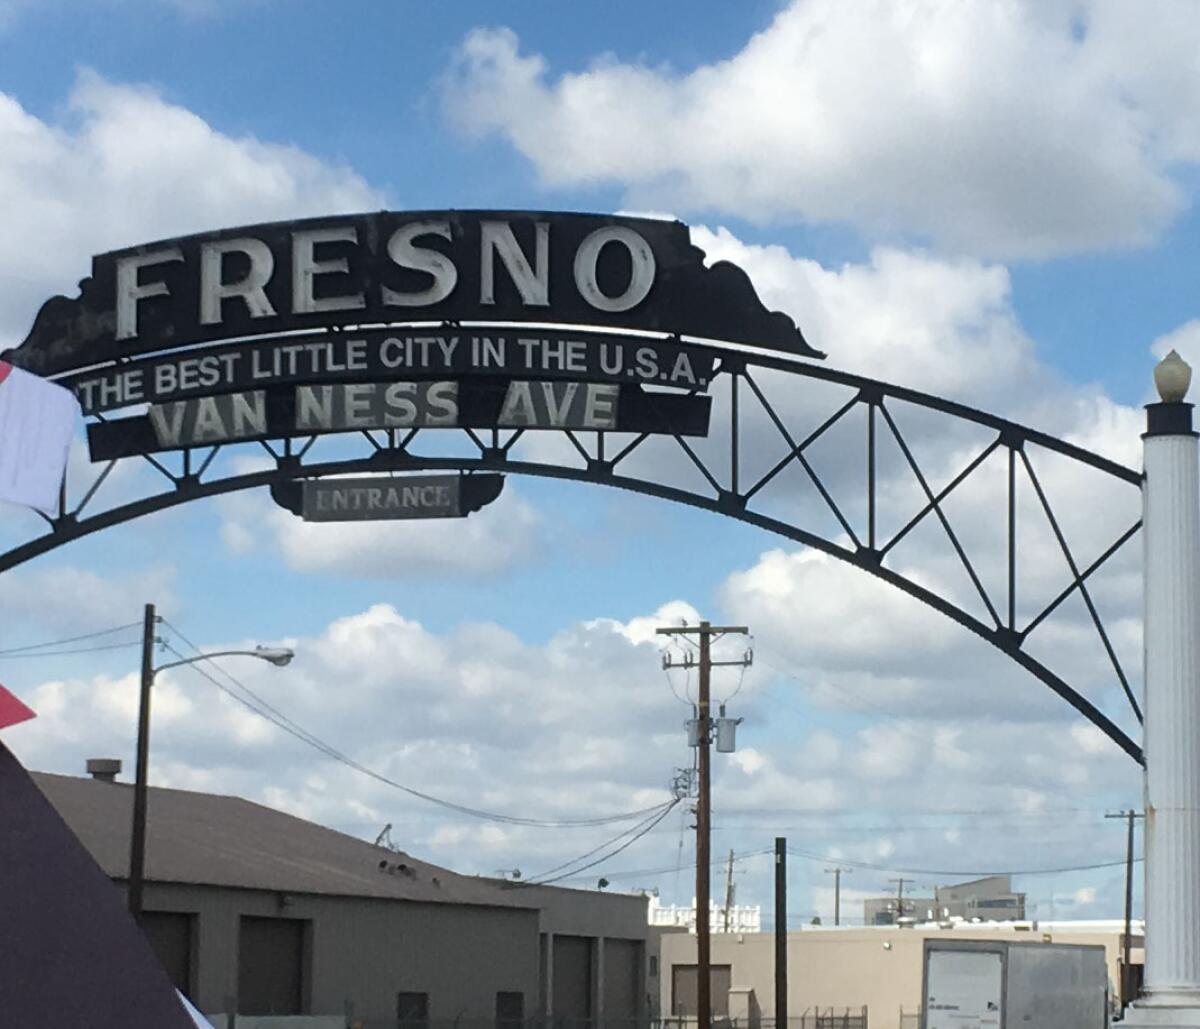 A large sign reads "Fresno: The best little city in the USA."